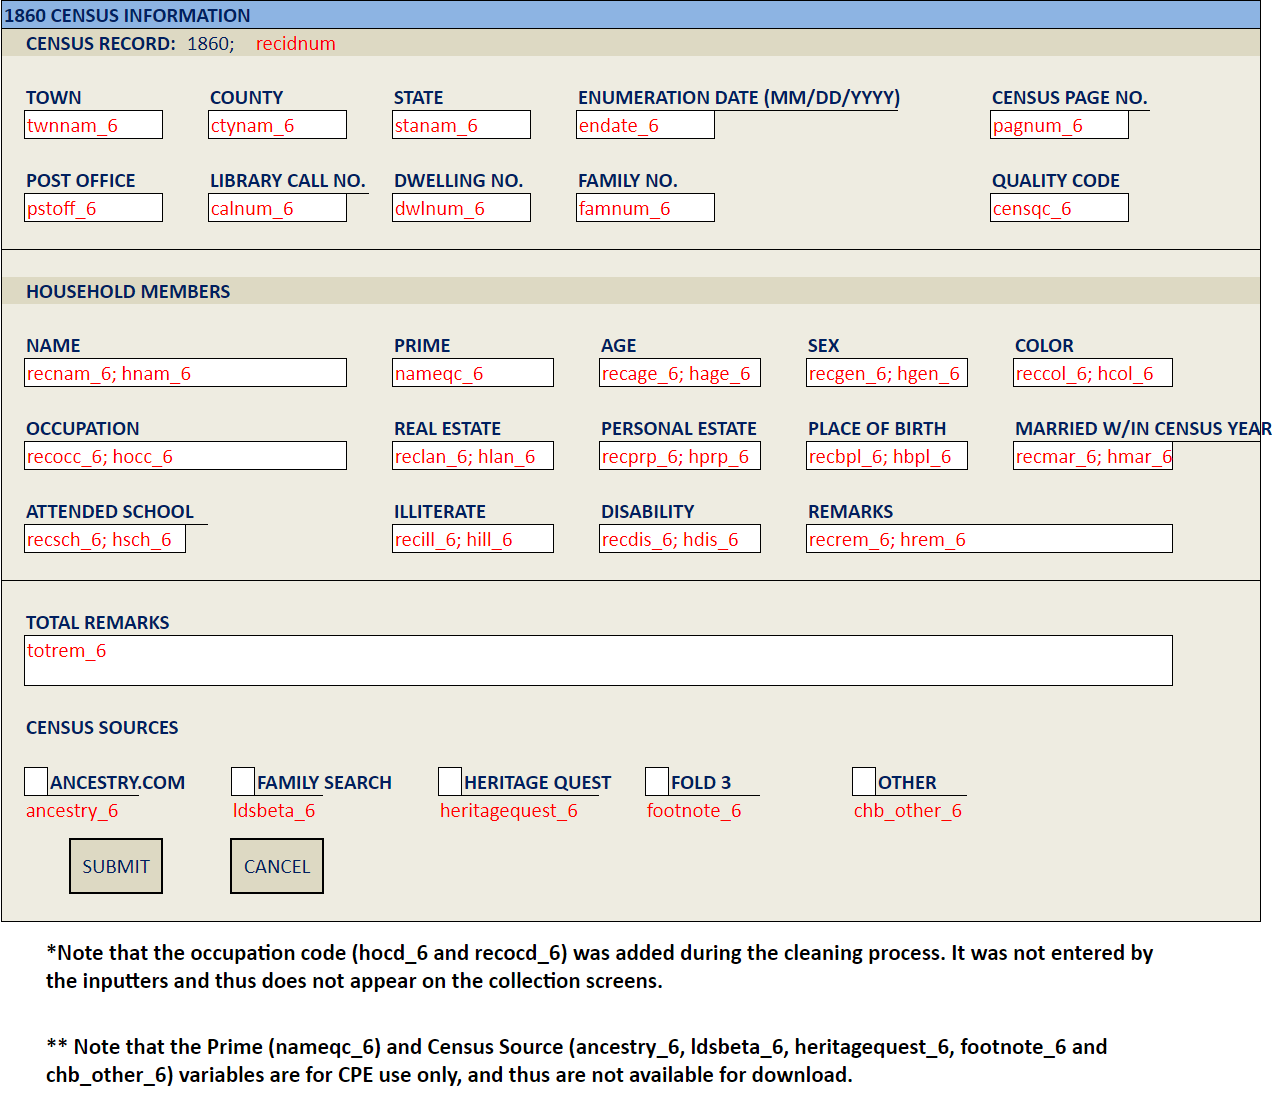 Image of the Union Army 1860 Census data entry screen